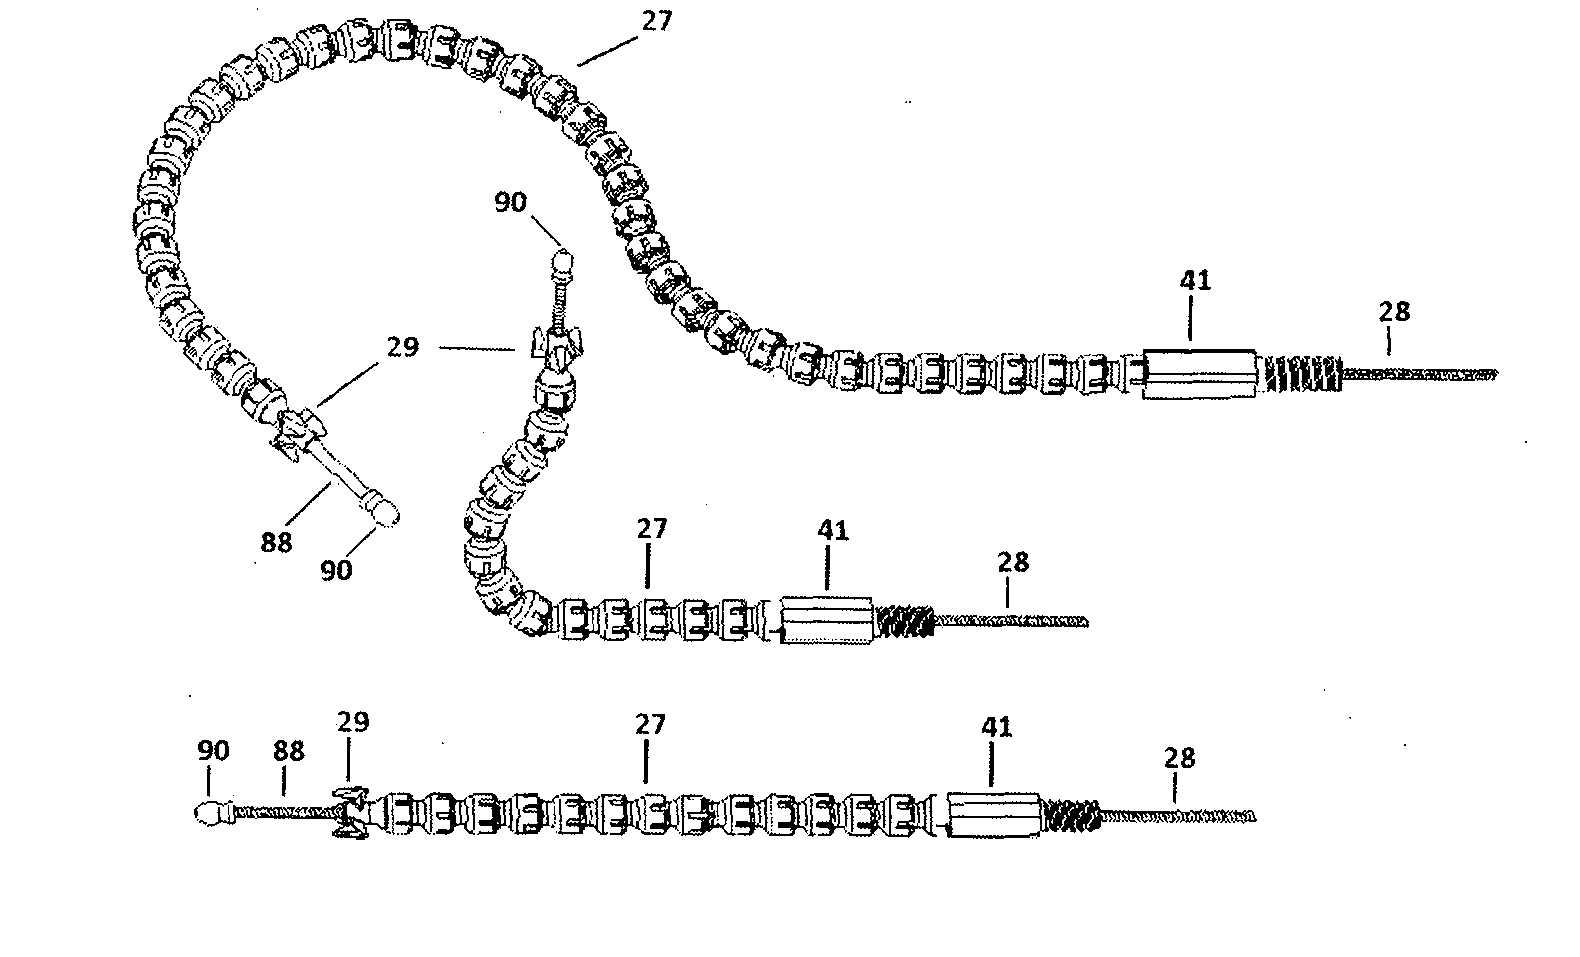 System for Excising Anal Fistula Traces